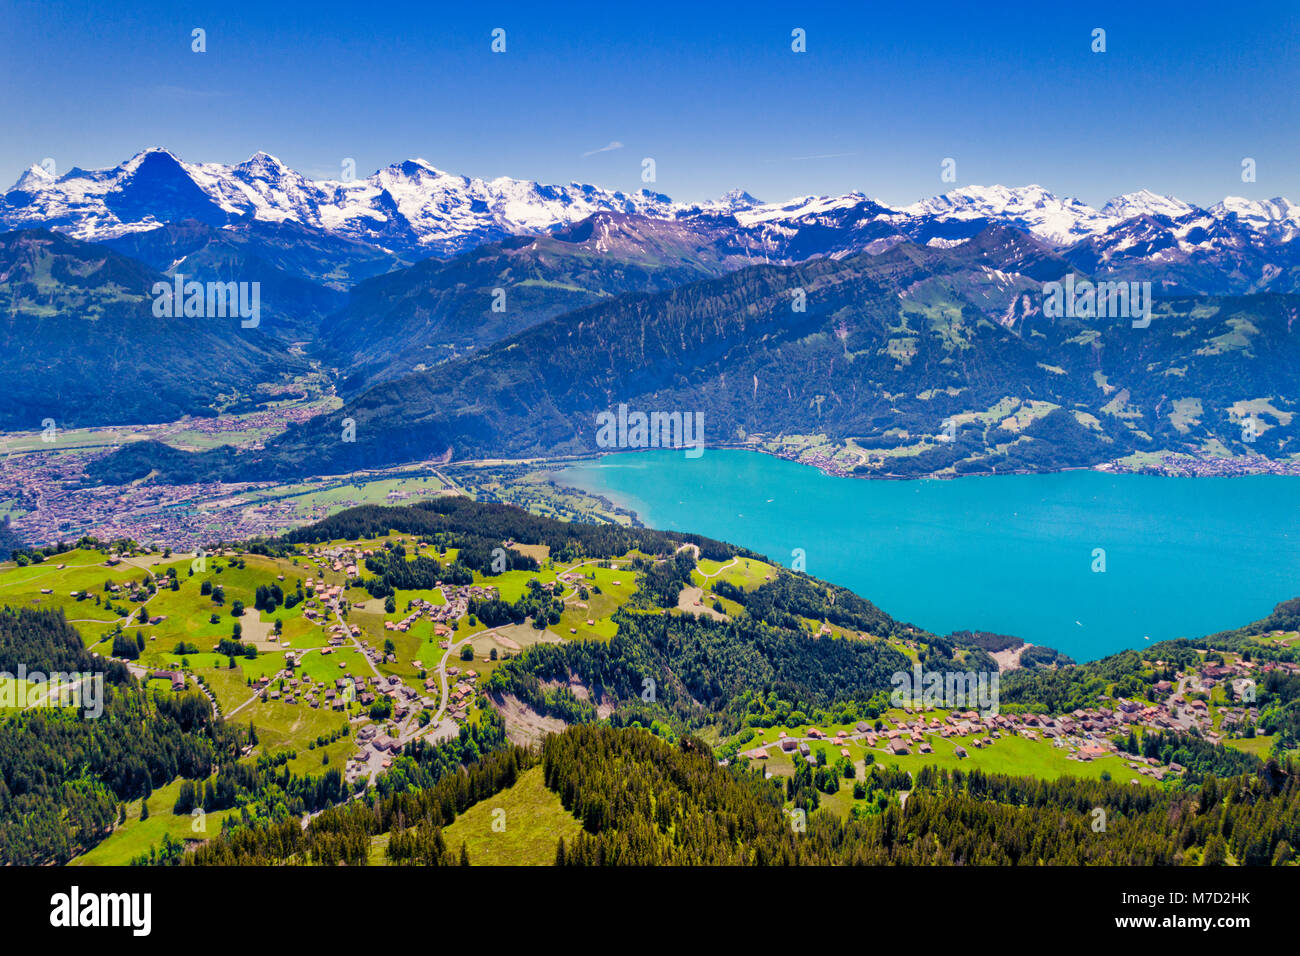 Aerial view of Lake Thun and Bernese Alps including Jungfrau, Eiger and Monch peaks from the top of Niederhorn in summer, Canton of Bern, Switzerland. Stock Photo